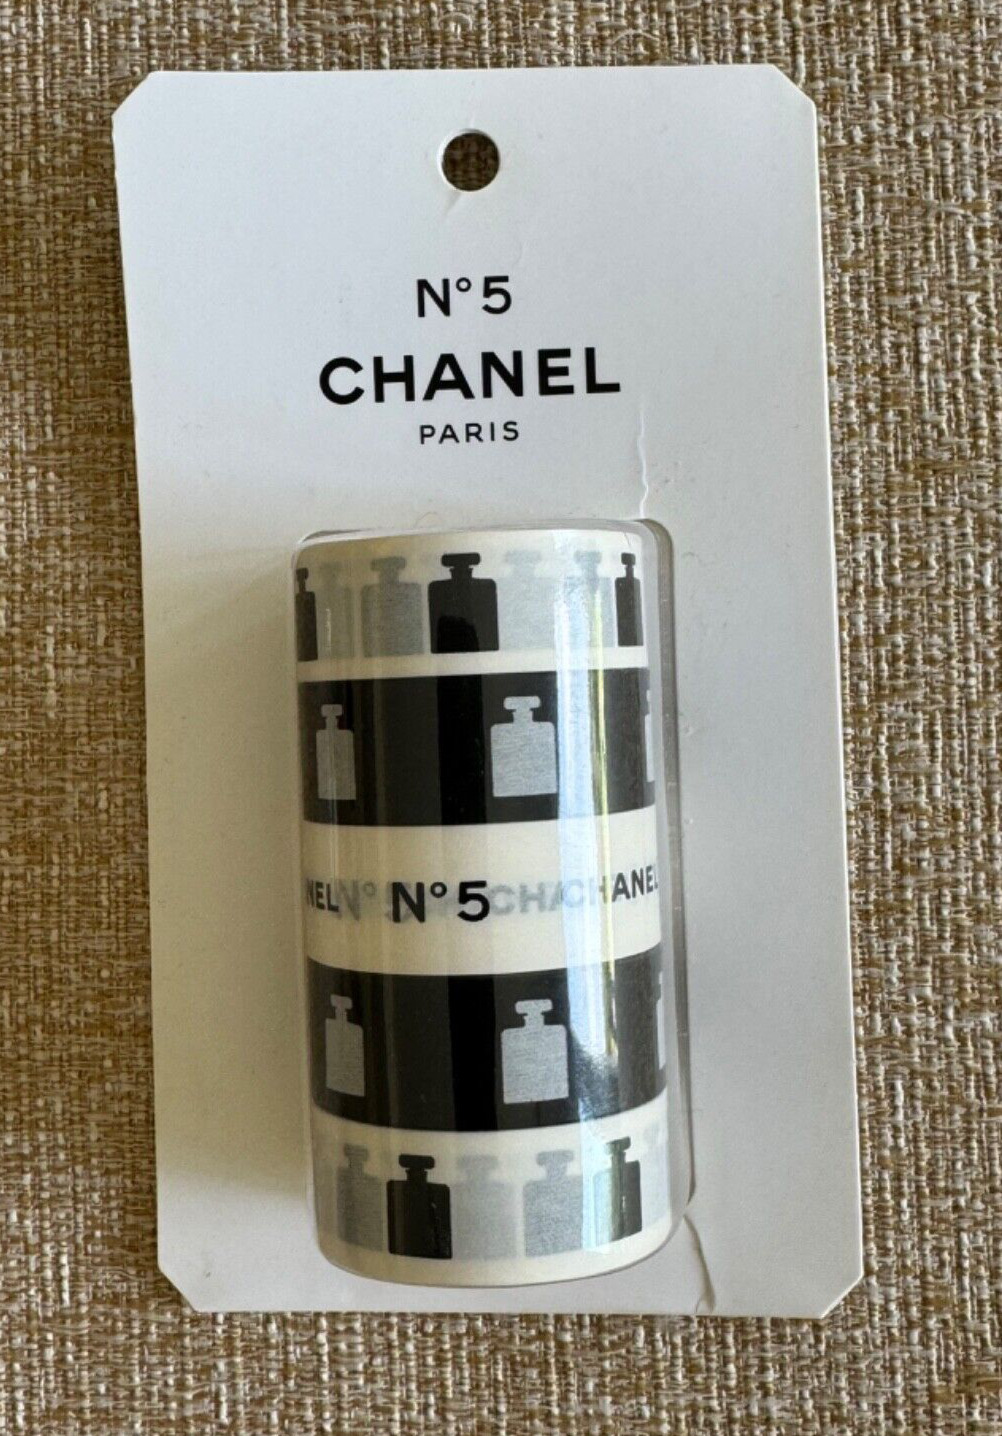 Chanel N.5 Factory Decorative Tape Collectors New Sealed Holiday Gift 